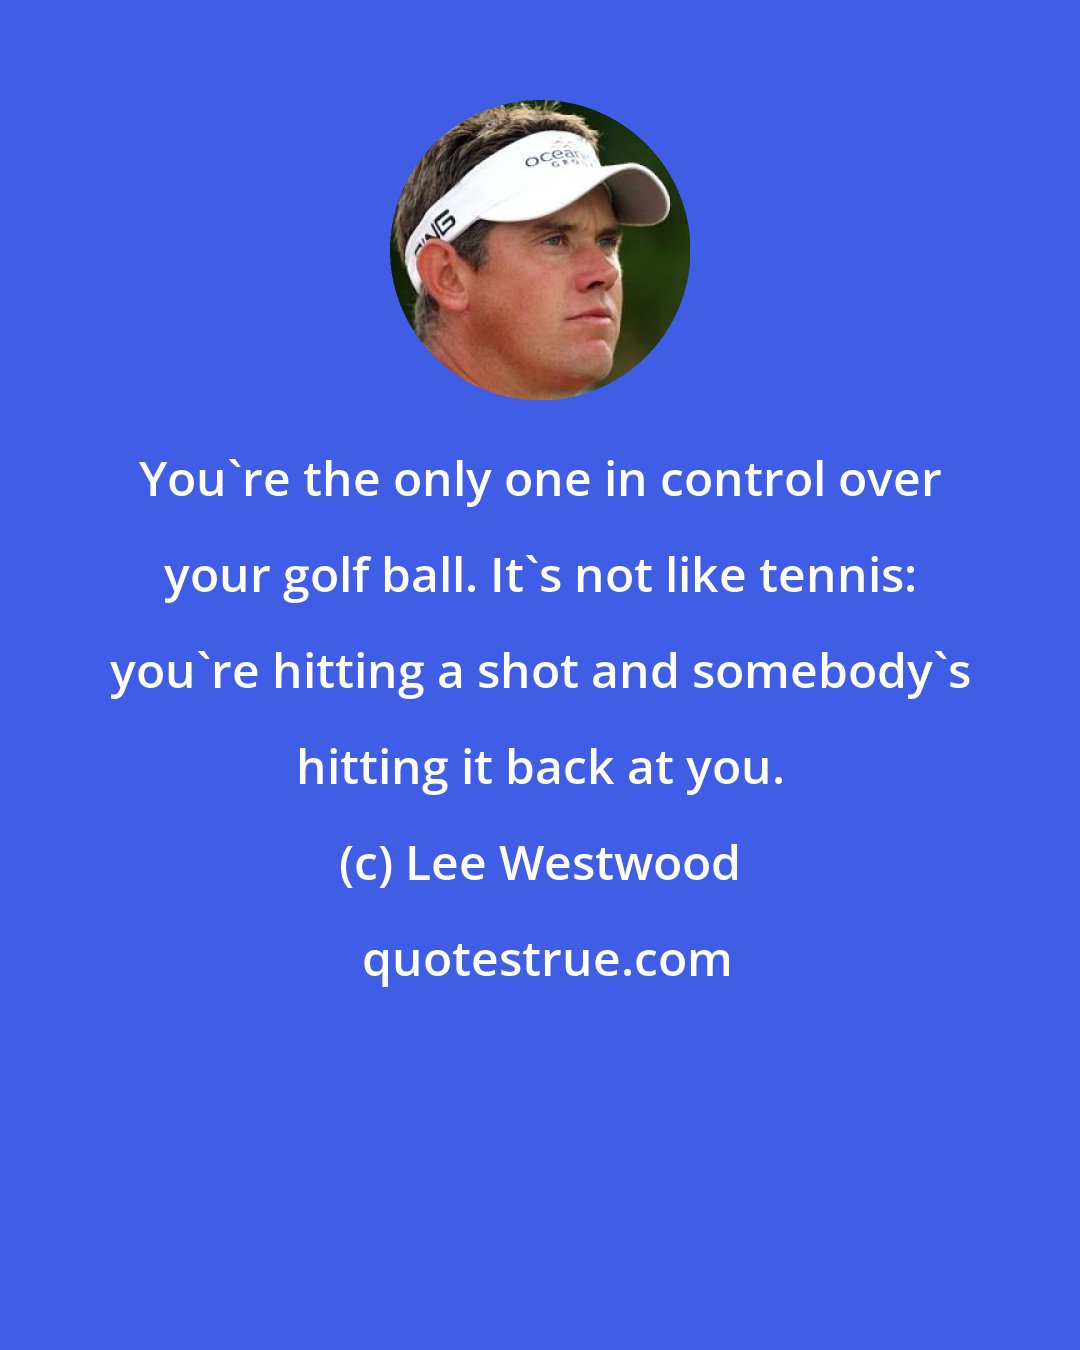 Lee Westwood: You're the only one in control over your golf ball. It's not like tennis: you're hitting a shot and somebody's hitting it back at you.